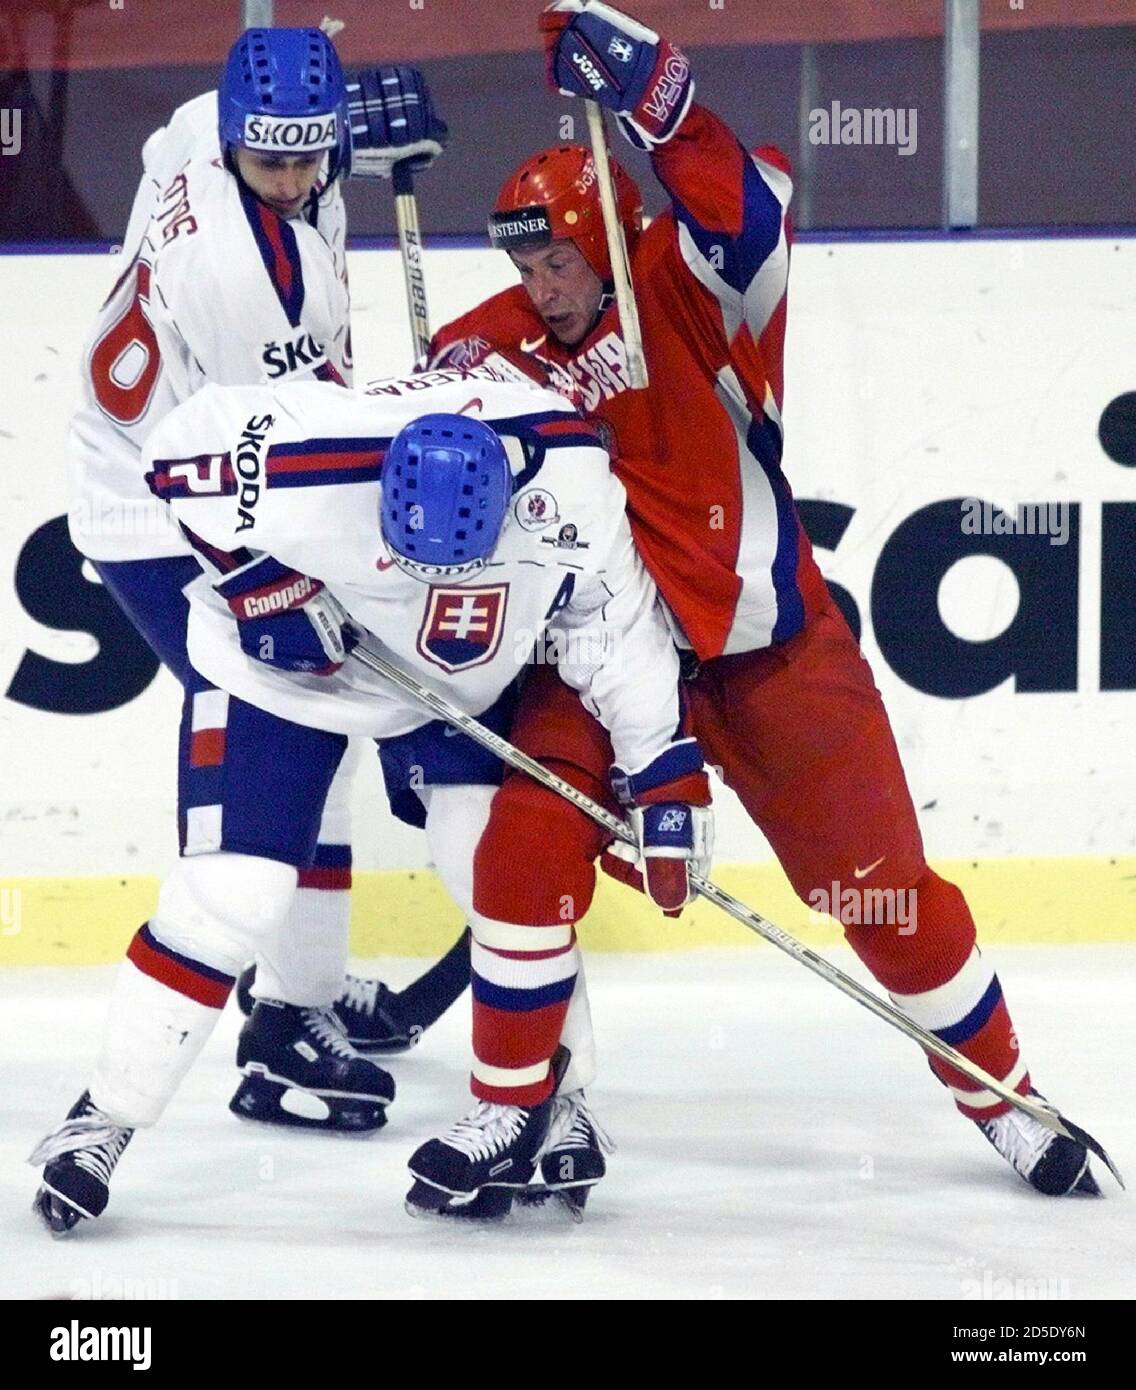 Russian's Alexei Kovalev (R) fights for the puck against Slovakia's Lubomir  Sekeras (L) during their Ice hockey World Championship qualifiing game in  Basle May 9. Slovakia's Jozef Stumpel (back) looks on. RS/